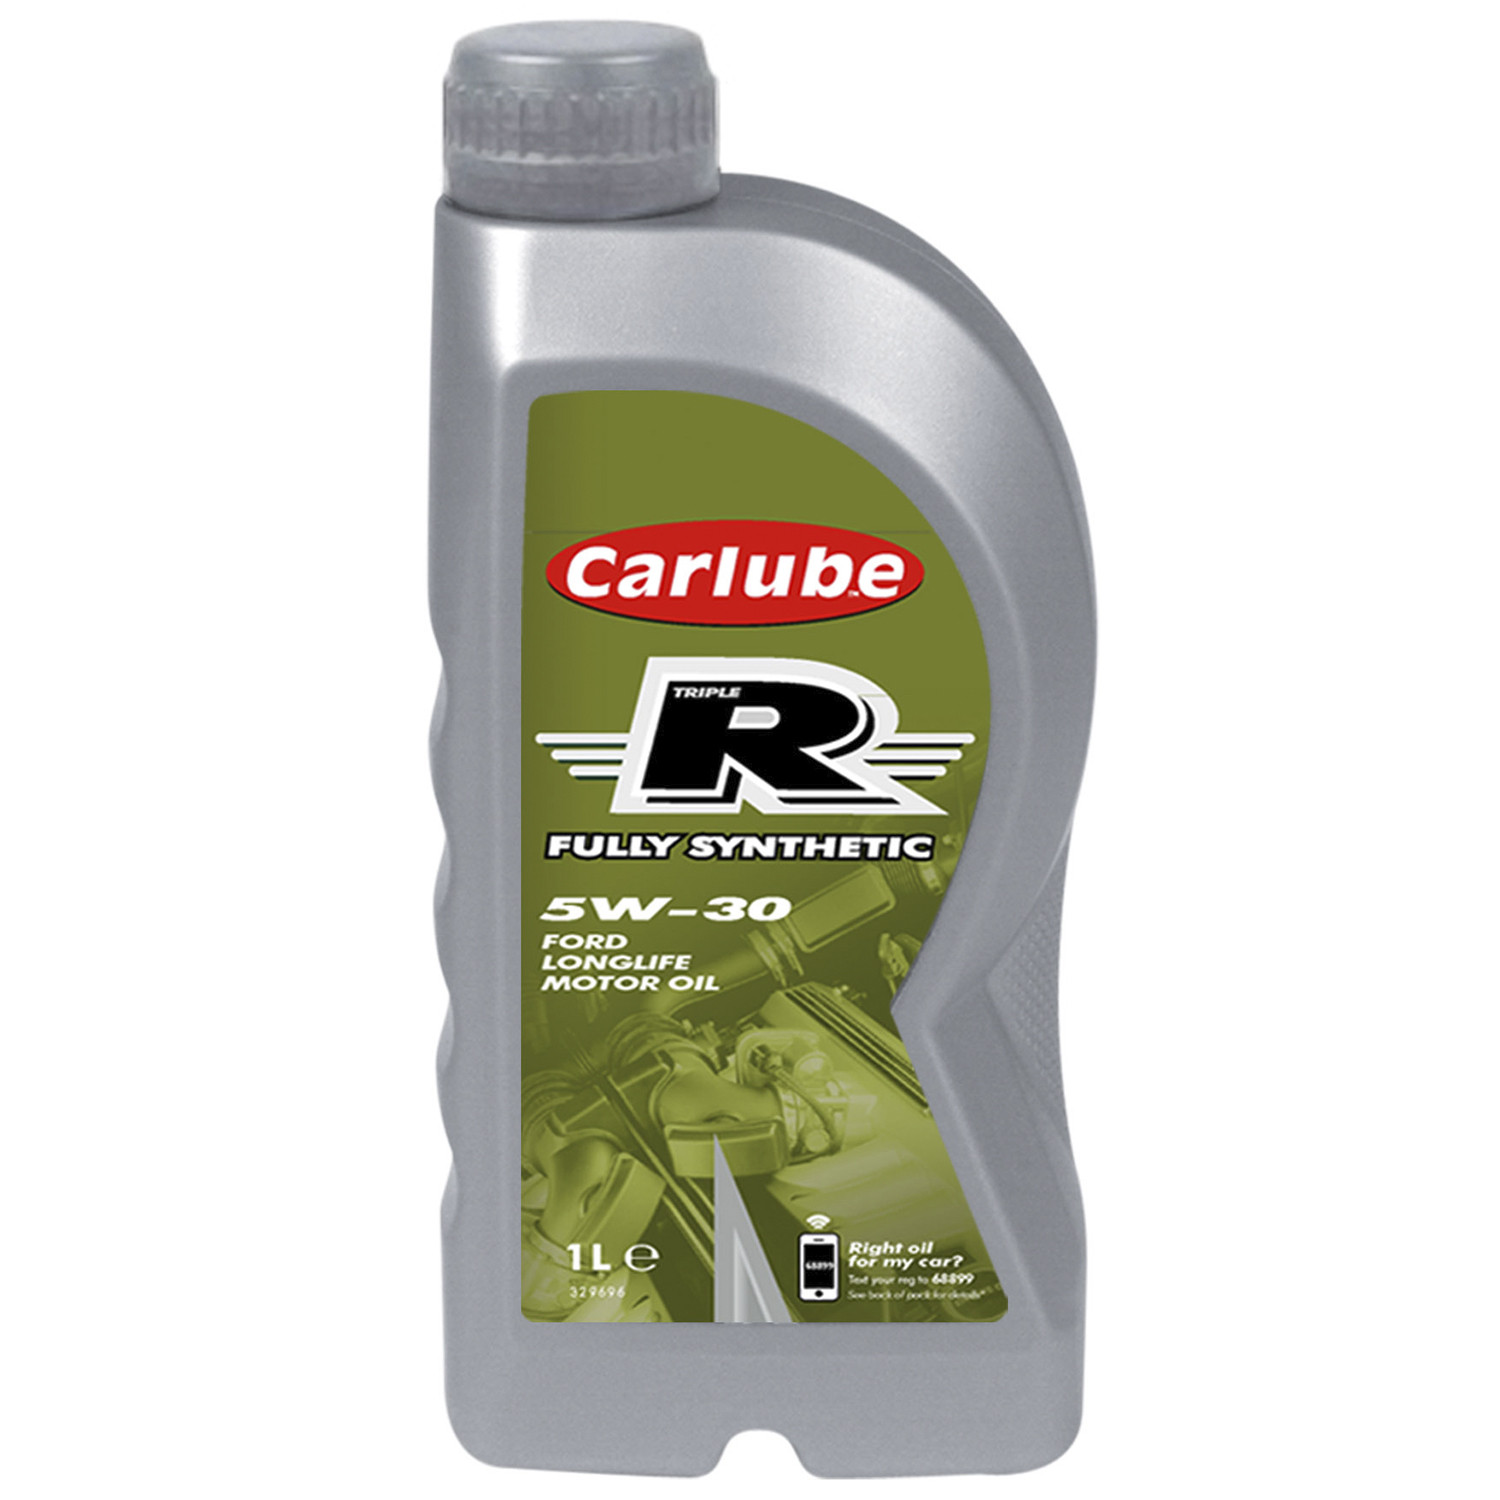 Carlube Triple R Fully Synthetic 5W30 Ford Longlife Motor Oil 1L Image